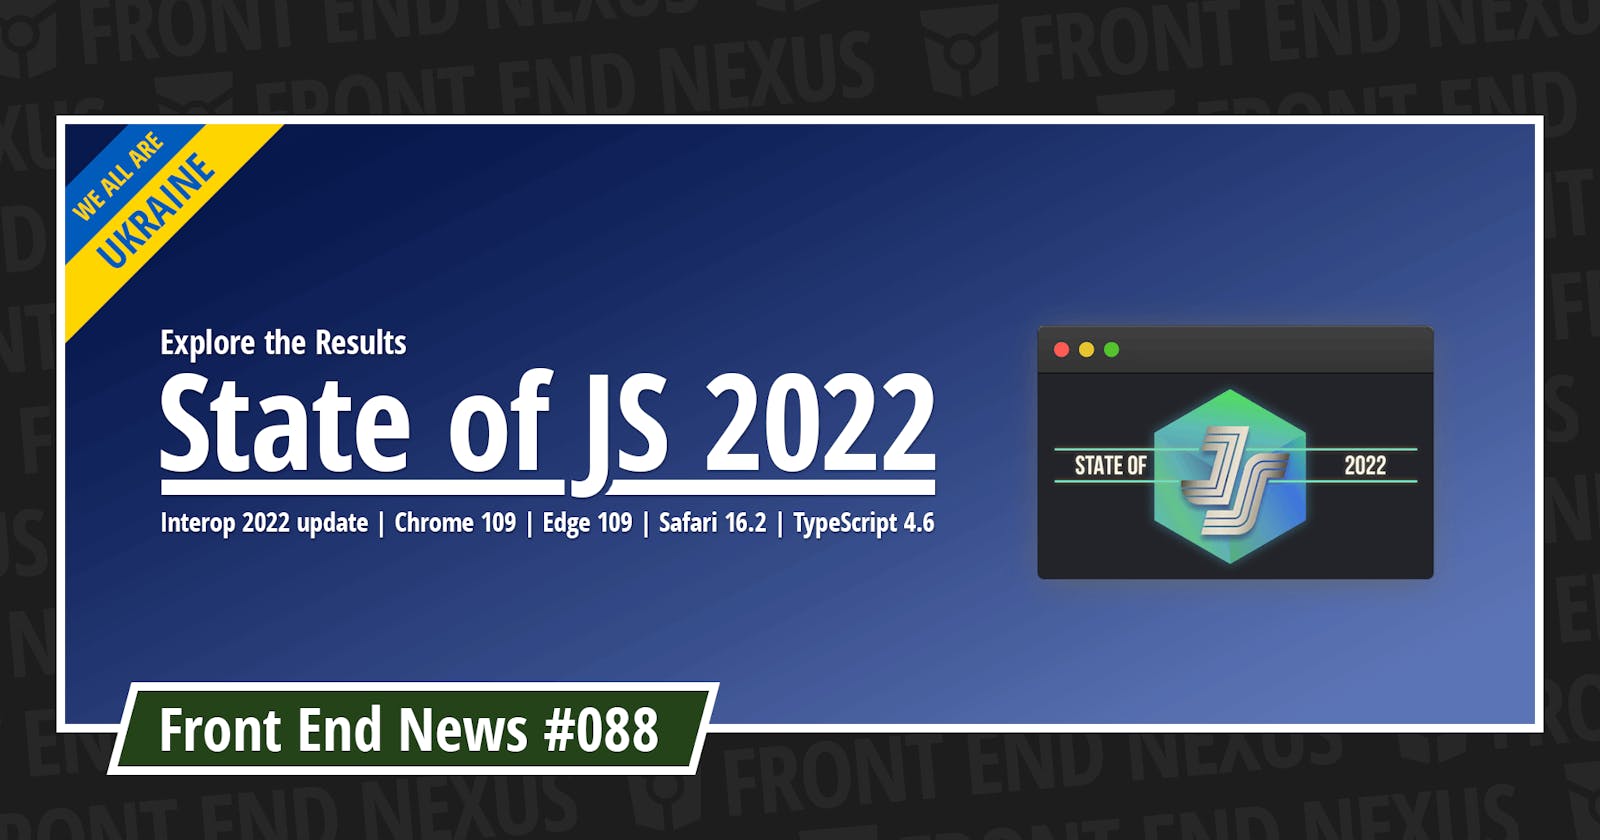 State of JS 2022 Results, Interop 2022 update, Chrome 109, Edge 109, Safari 16.2, TypeScript 4.6, and more | Front End News #088